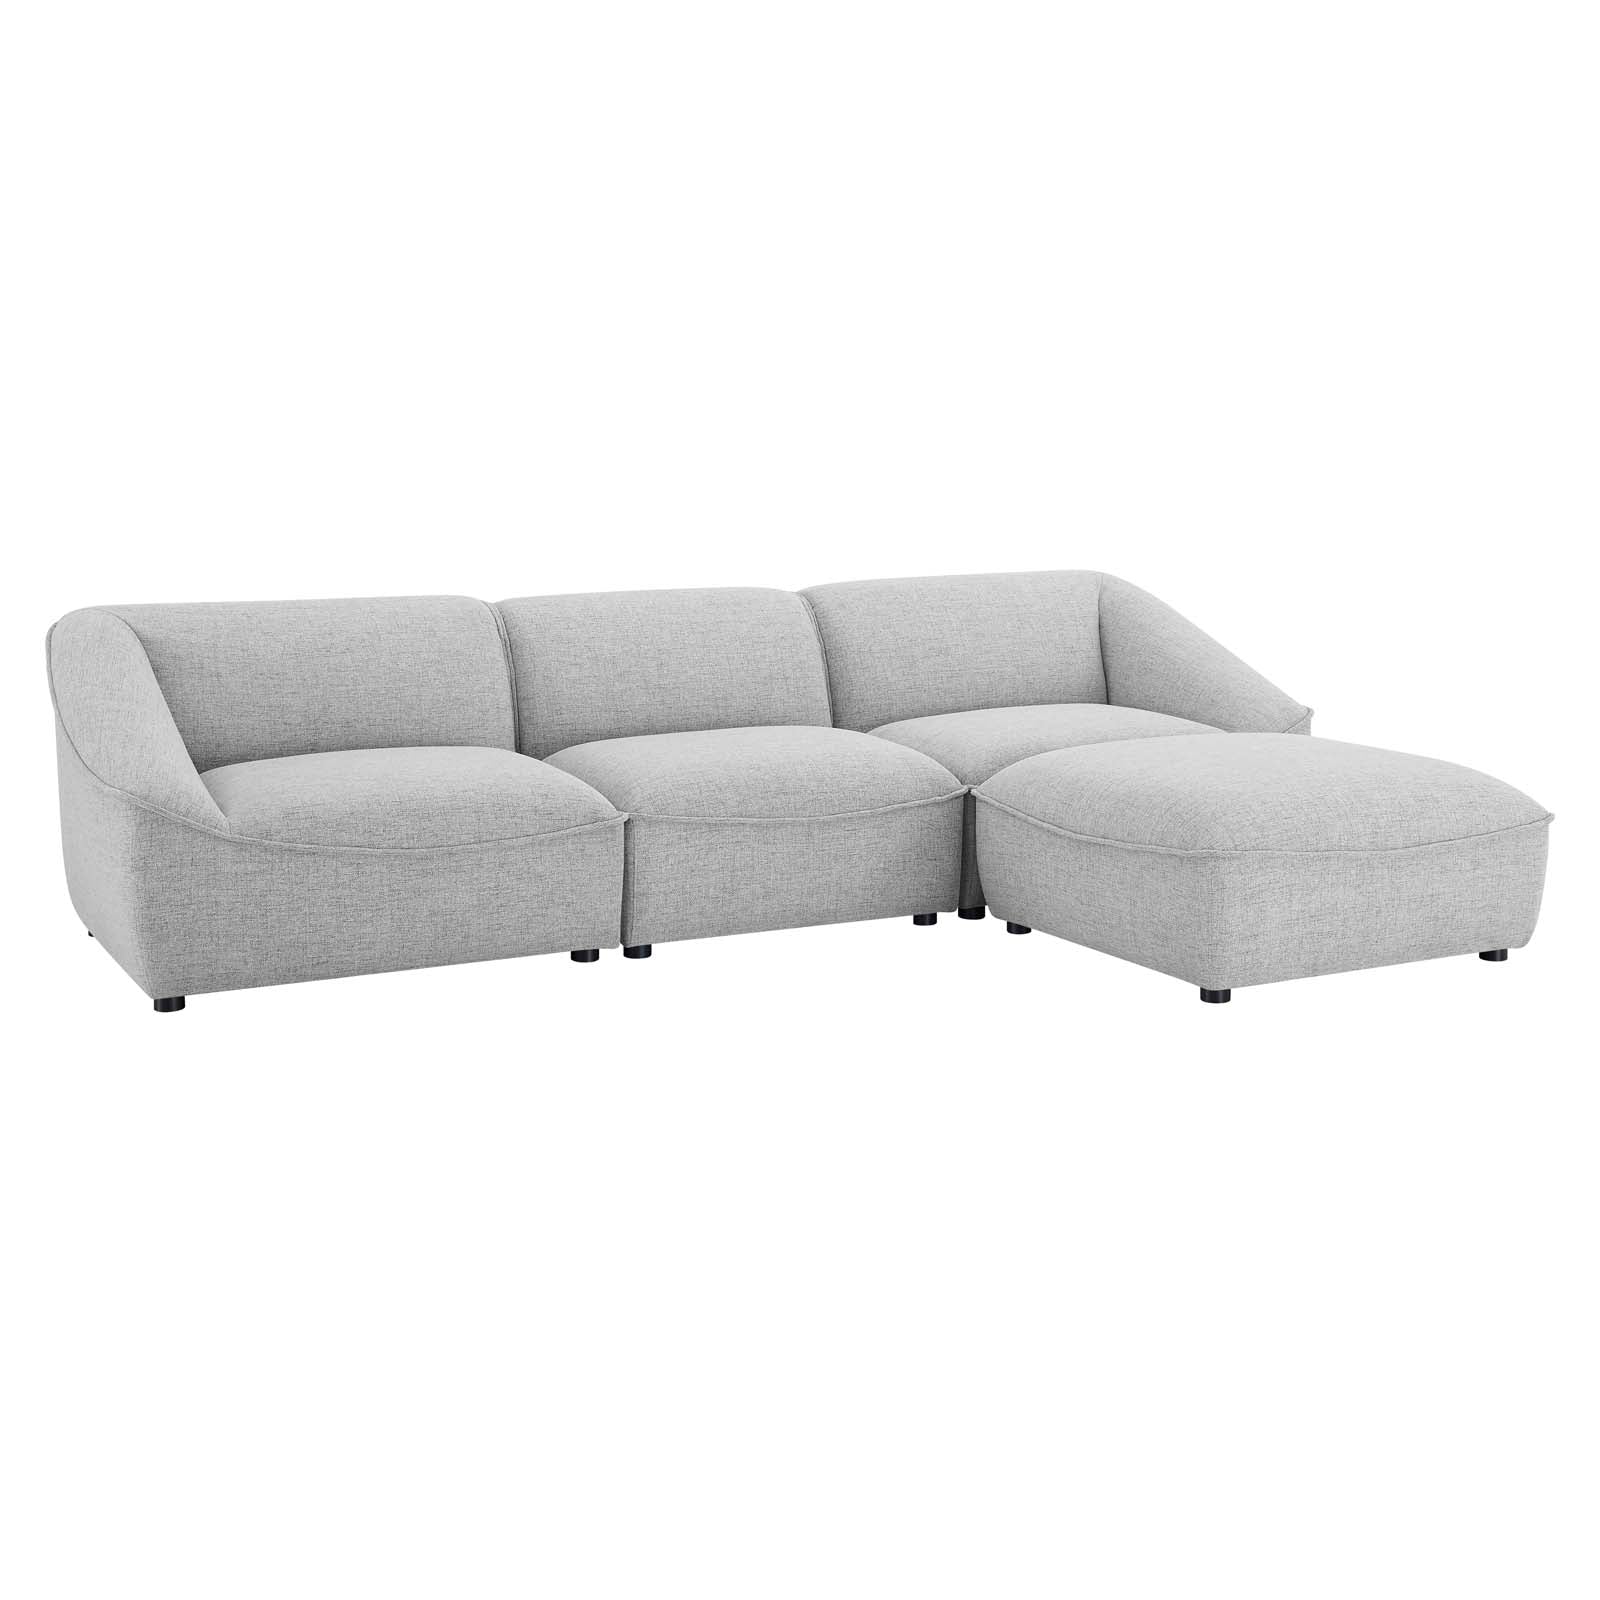 Comprise 4-Piece Living Room Set - East Shore Modern Home Furnishings